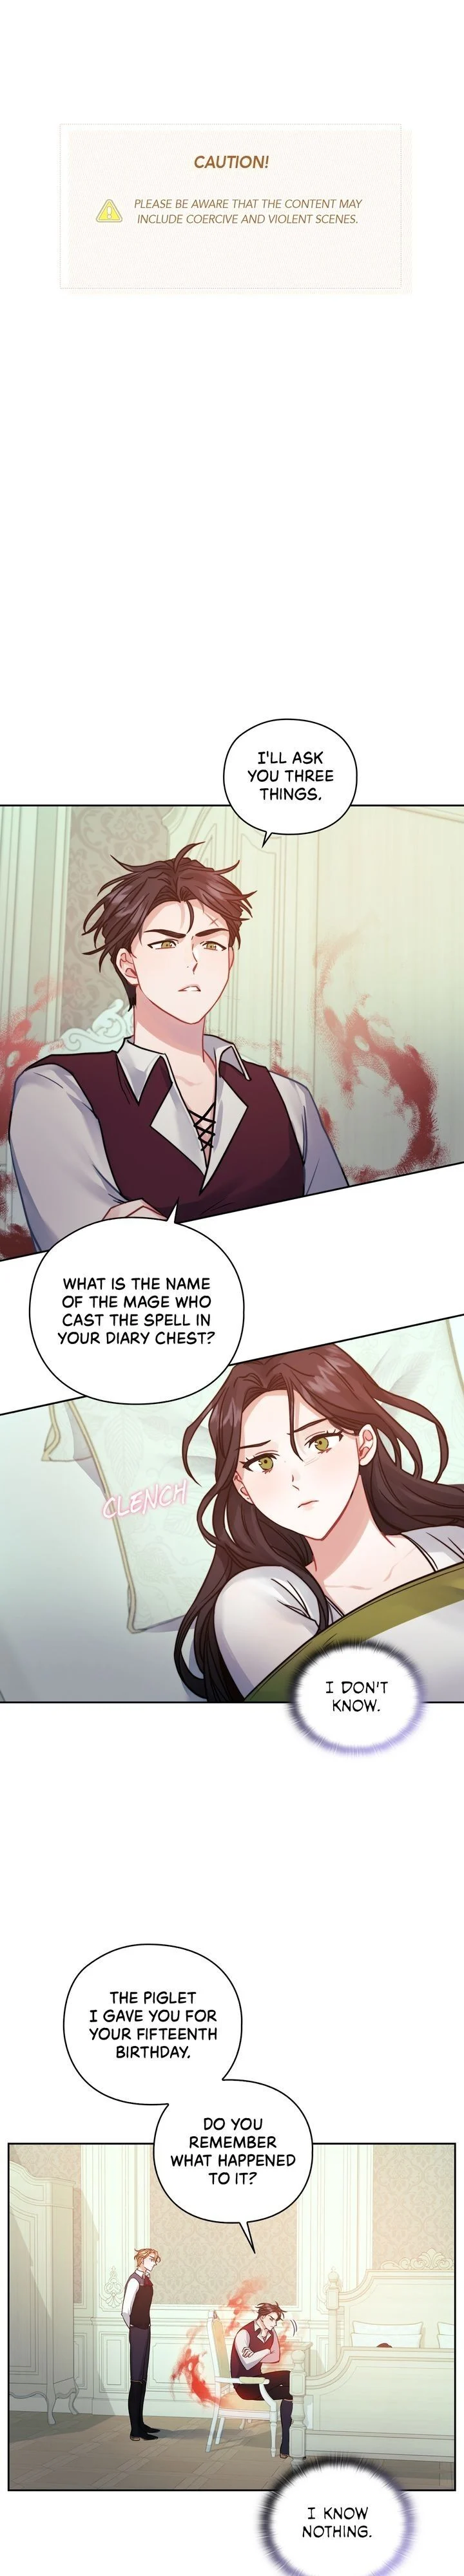 In The Name Of Your Death - Page 1